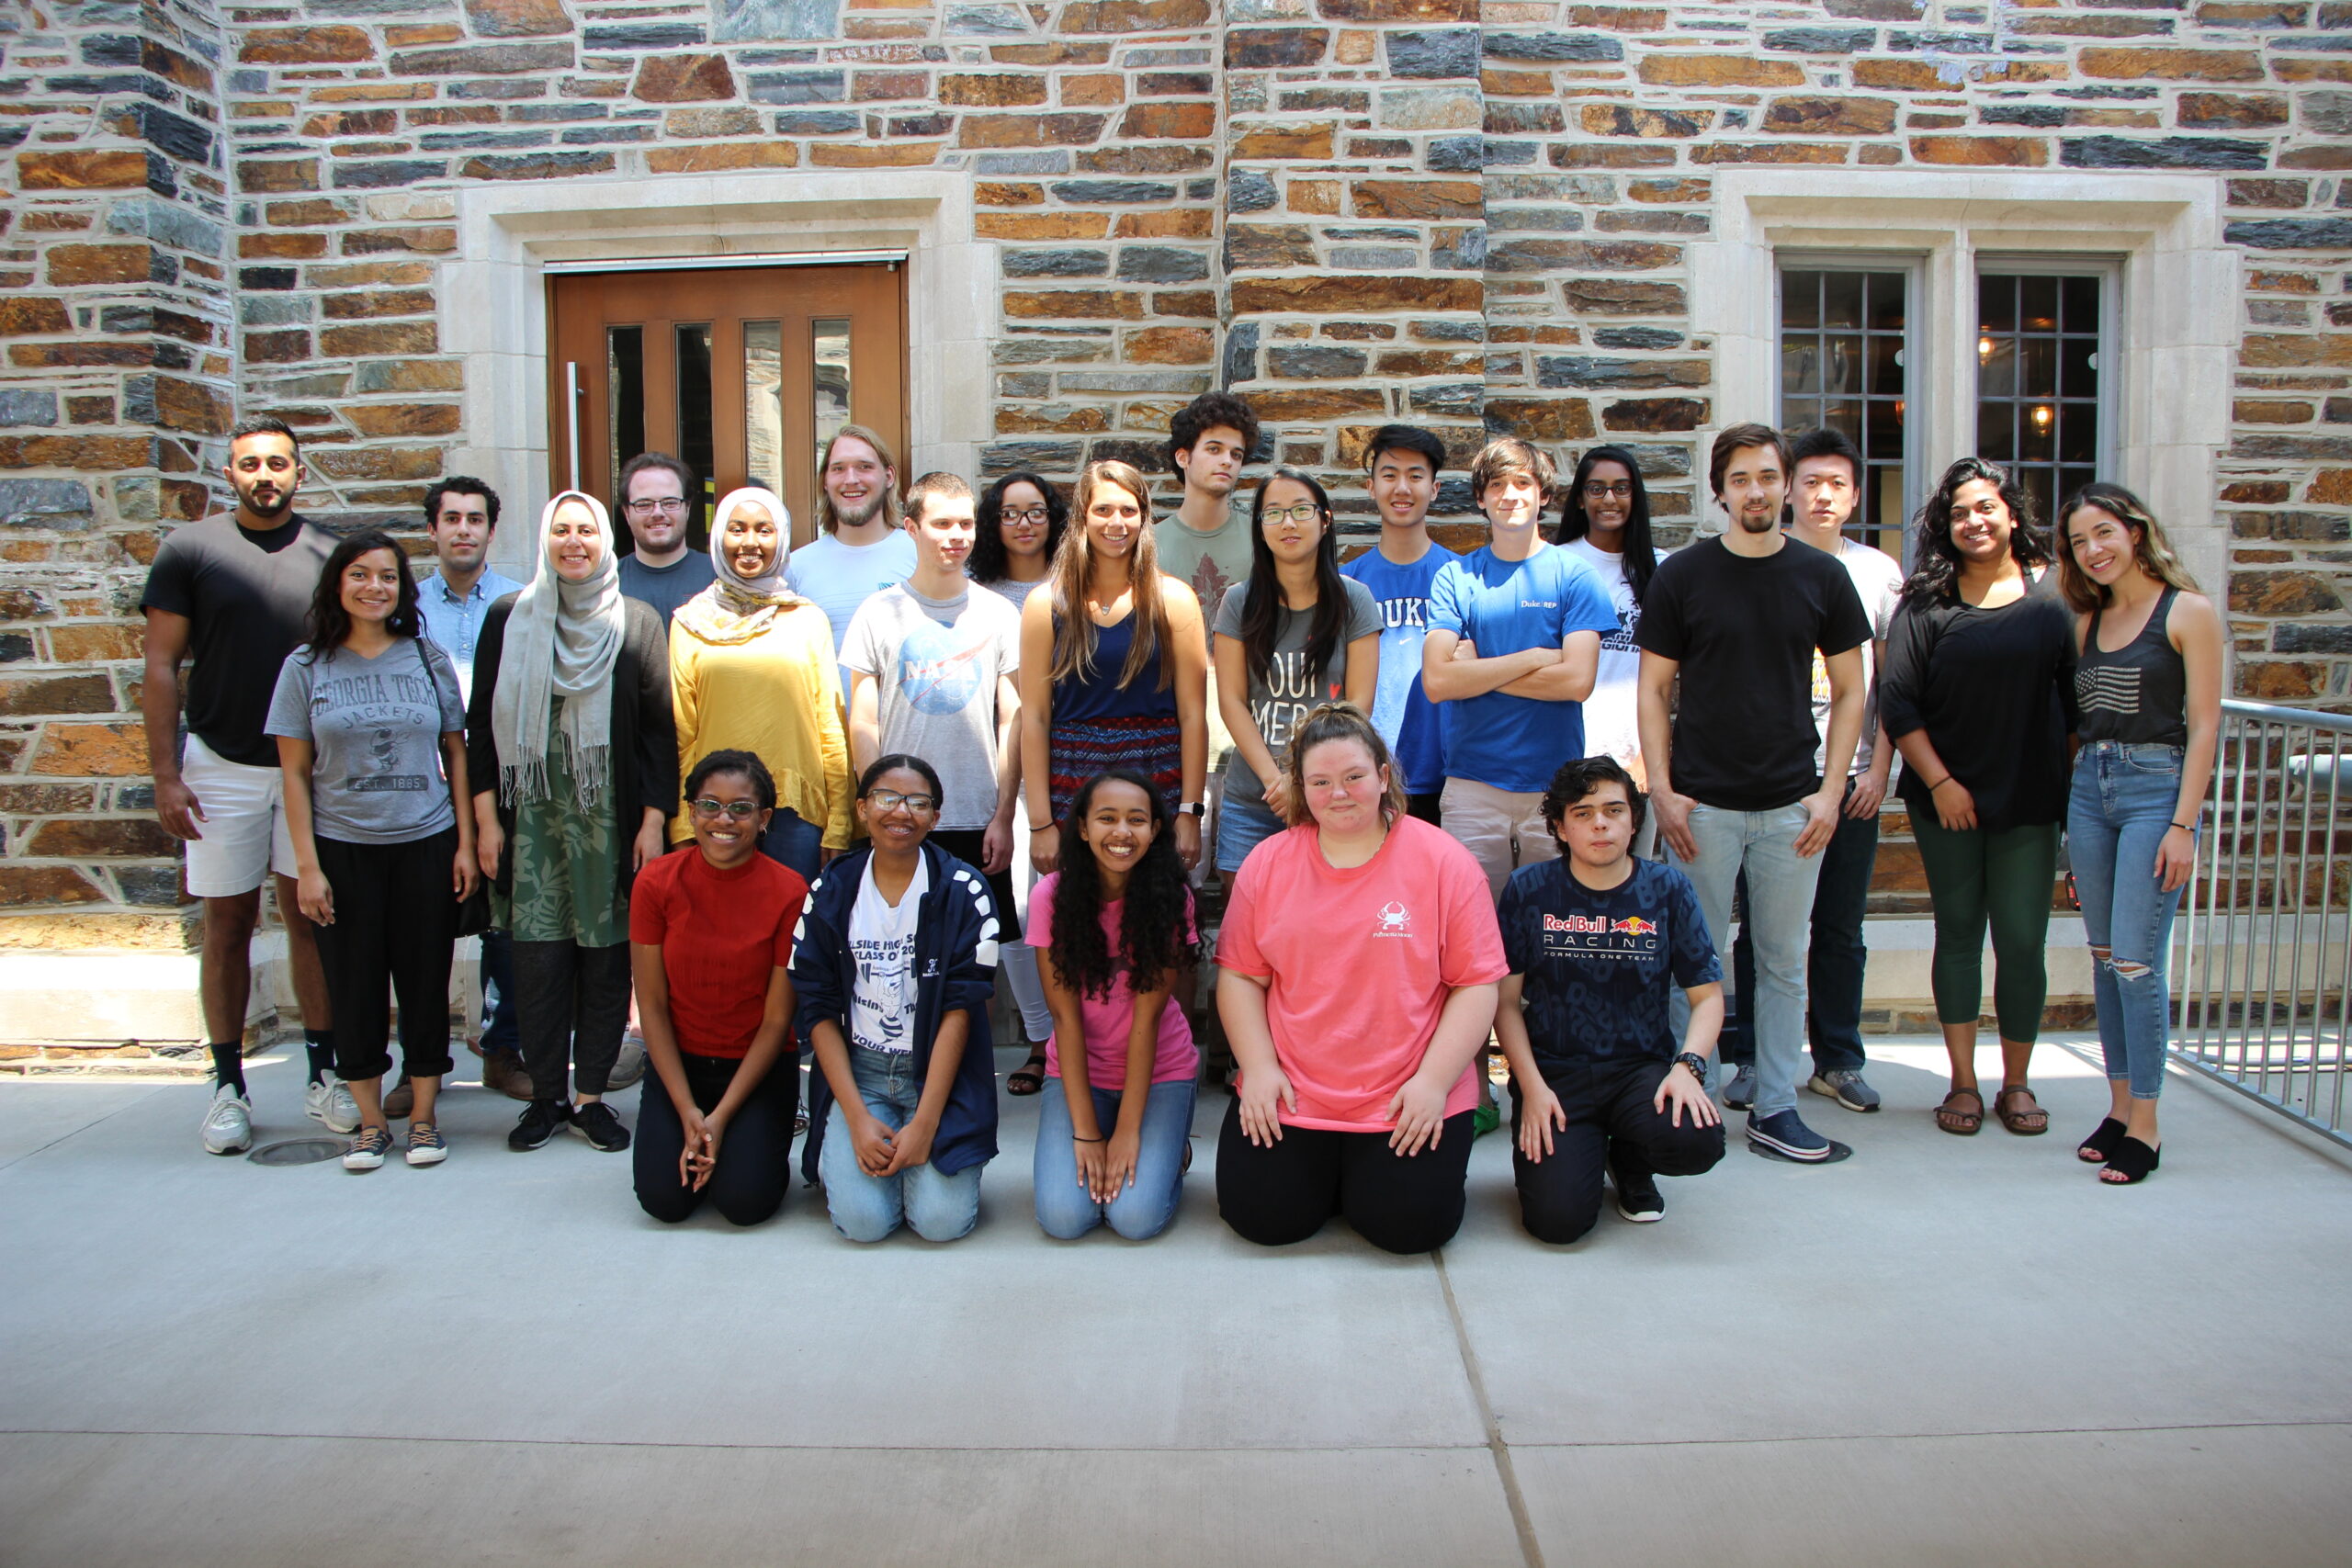 The DukeREP team with the participating high school students